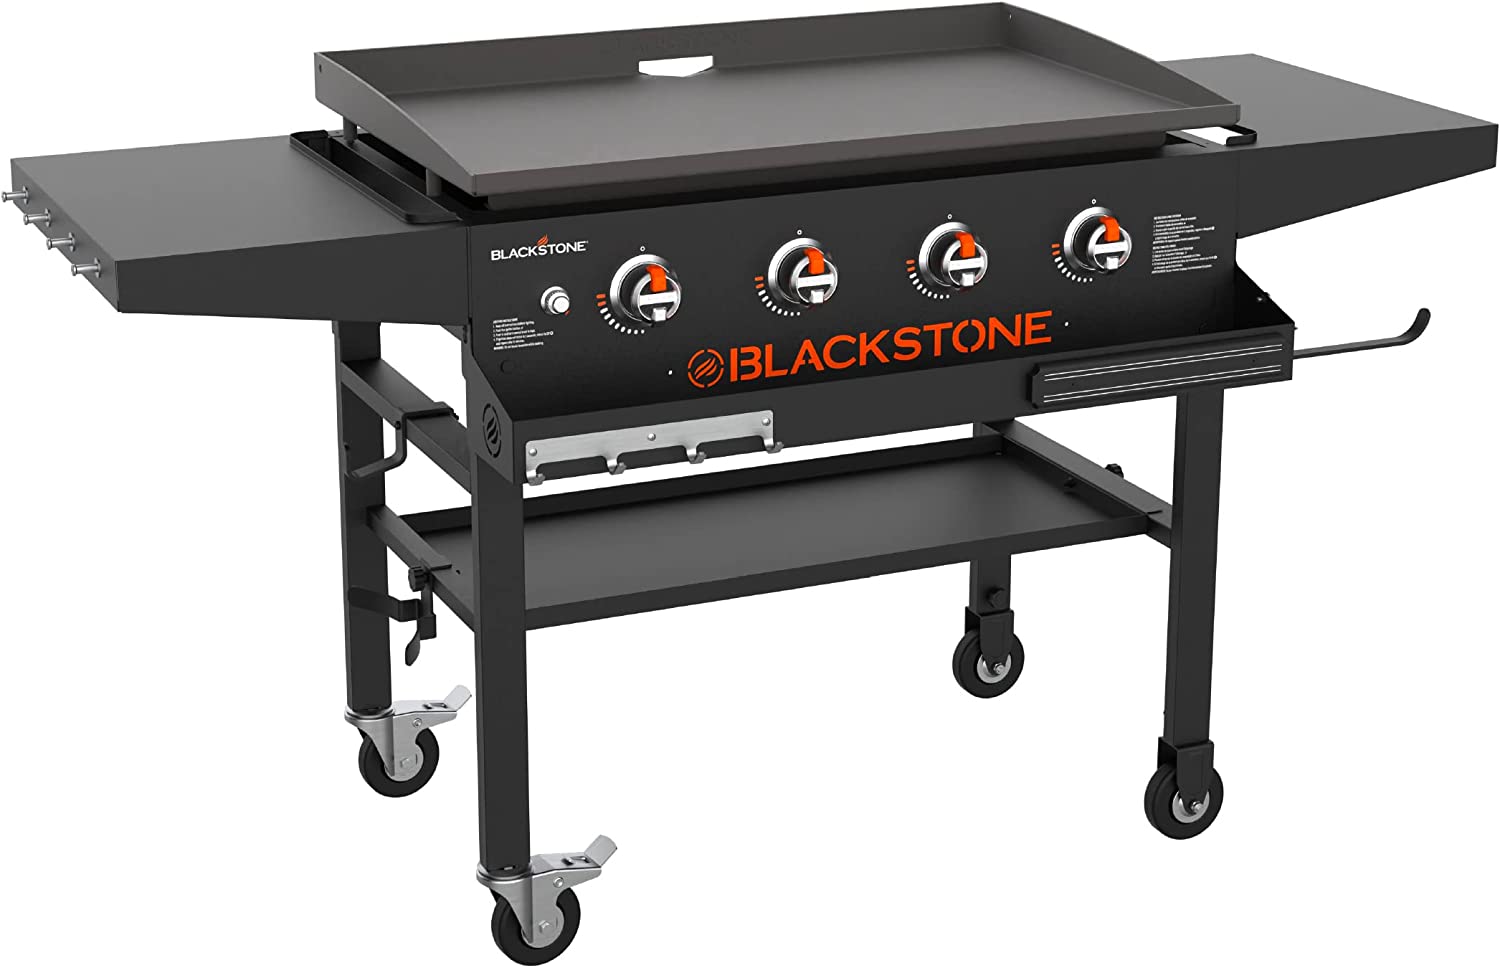 Blackstone 1984 Stainless Steel Backyard Griddle, 36-Inch